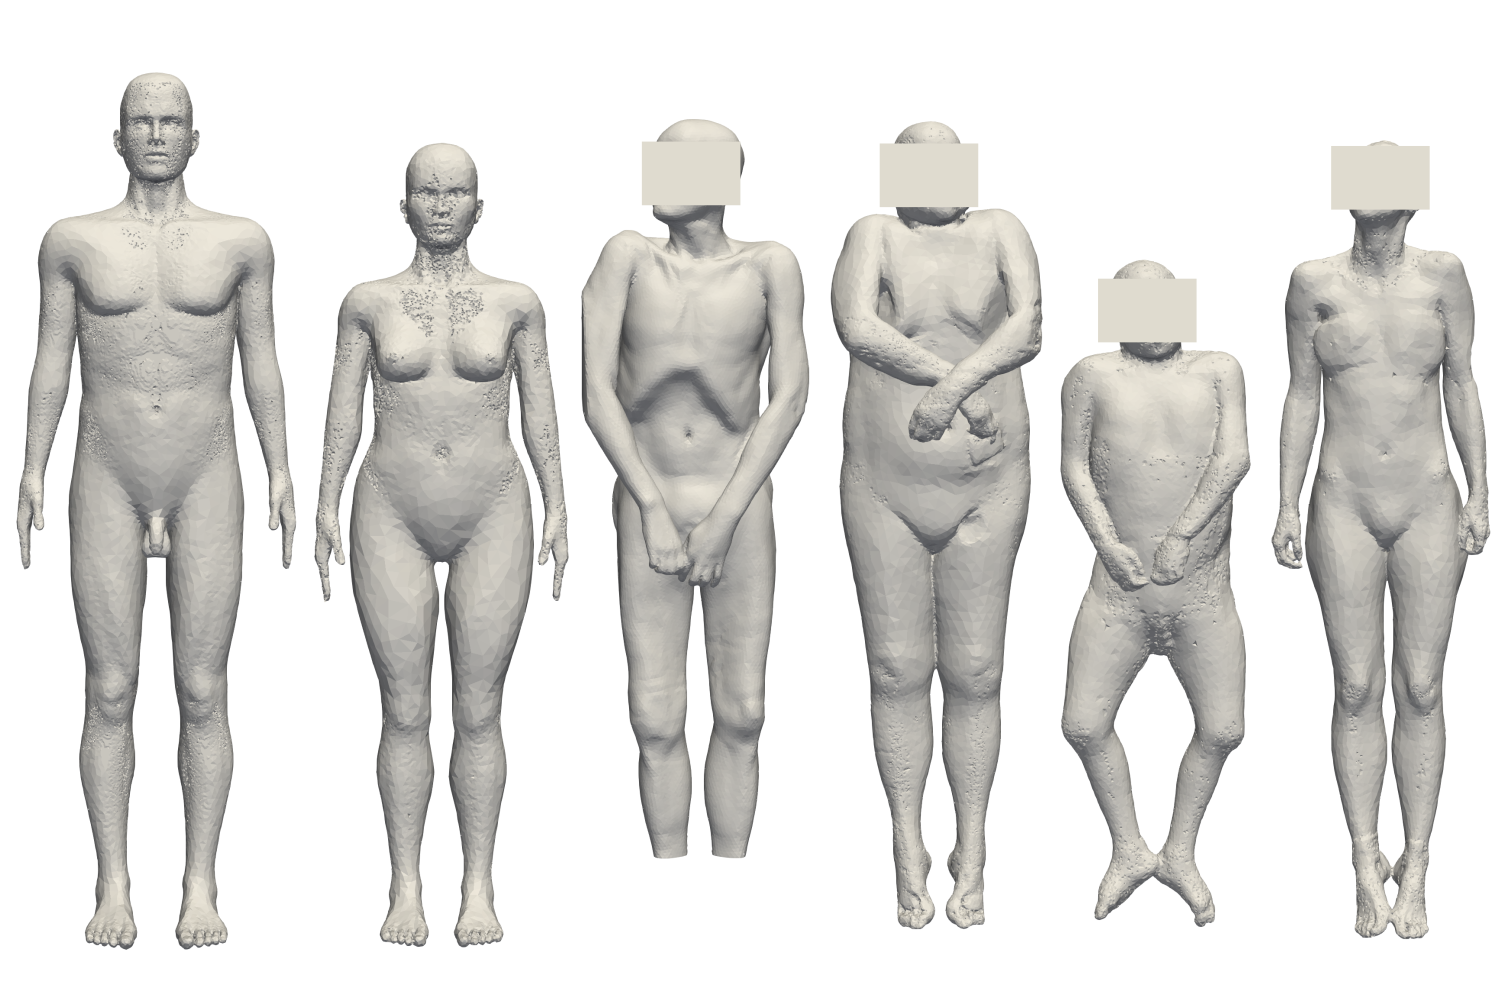 Different 3D meshes obtained from CT scans and CAD design